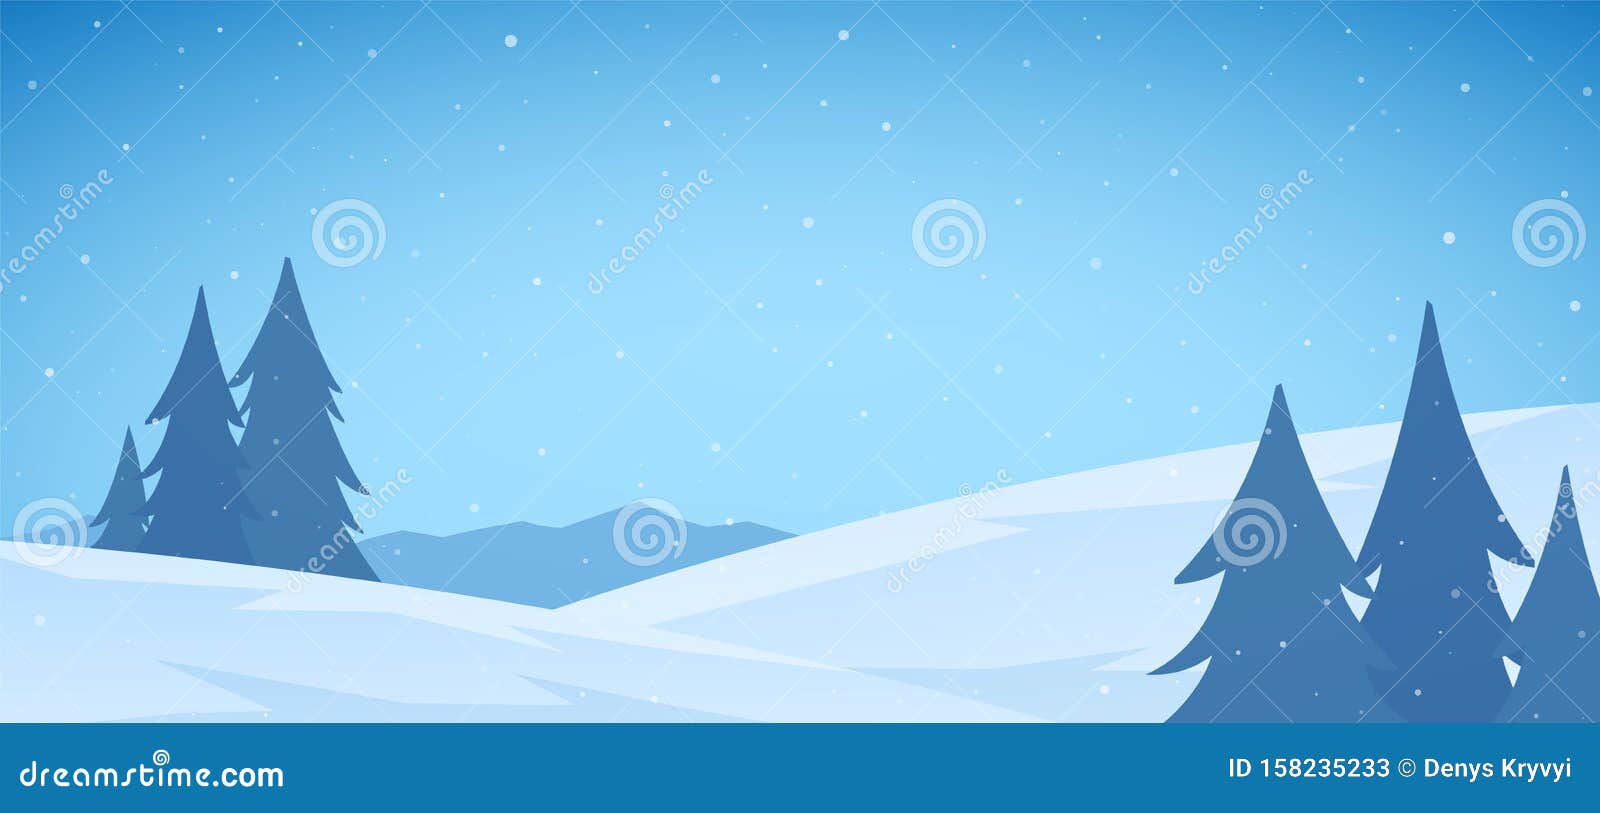 Cartoon Winter Snowy Mountains Flat Landscape with Pines and Hills.  Christmas Background Stock Vector - Illustration of evening, journey:  158235233